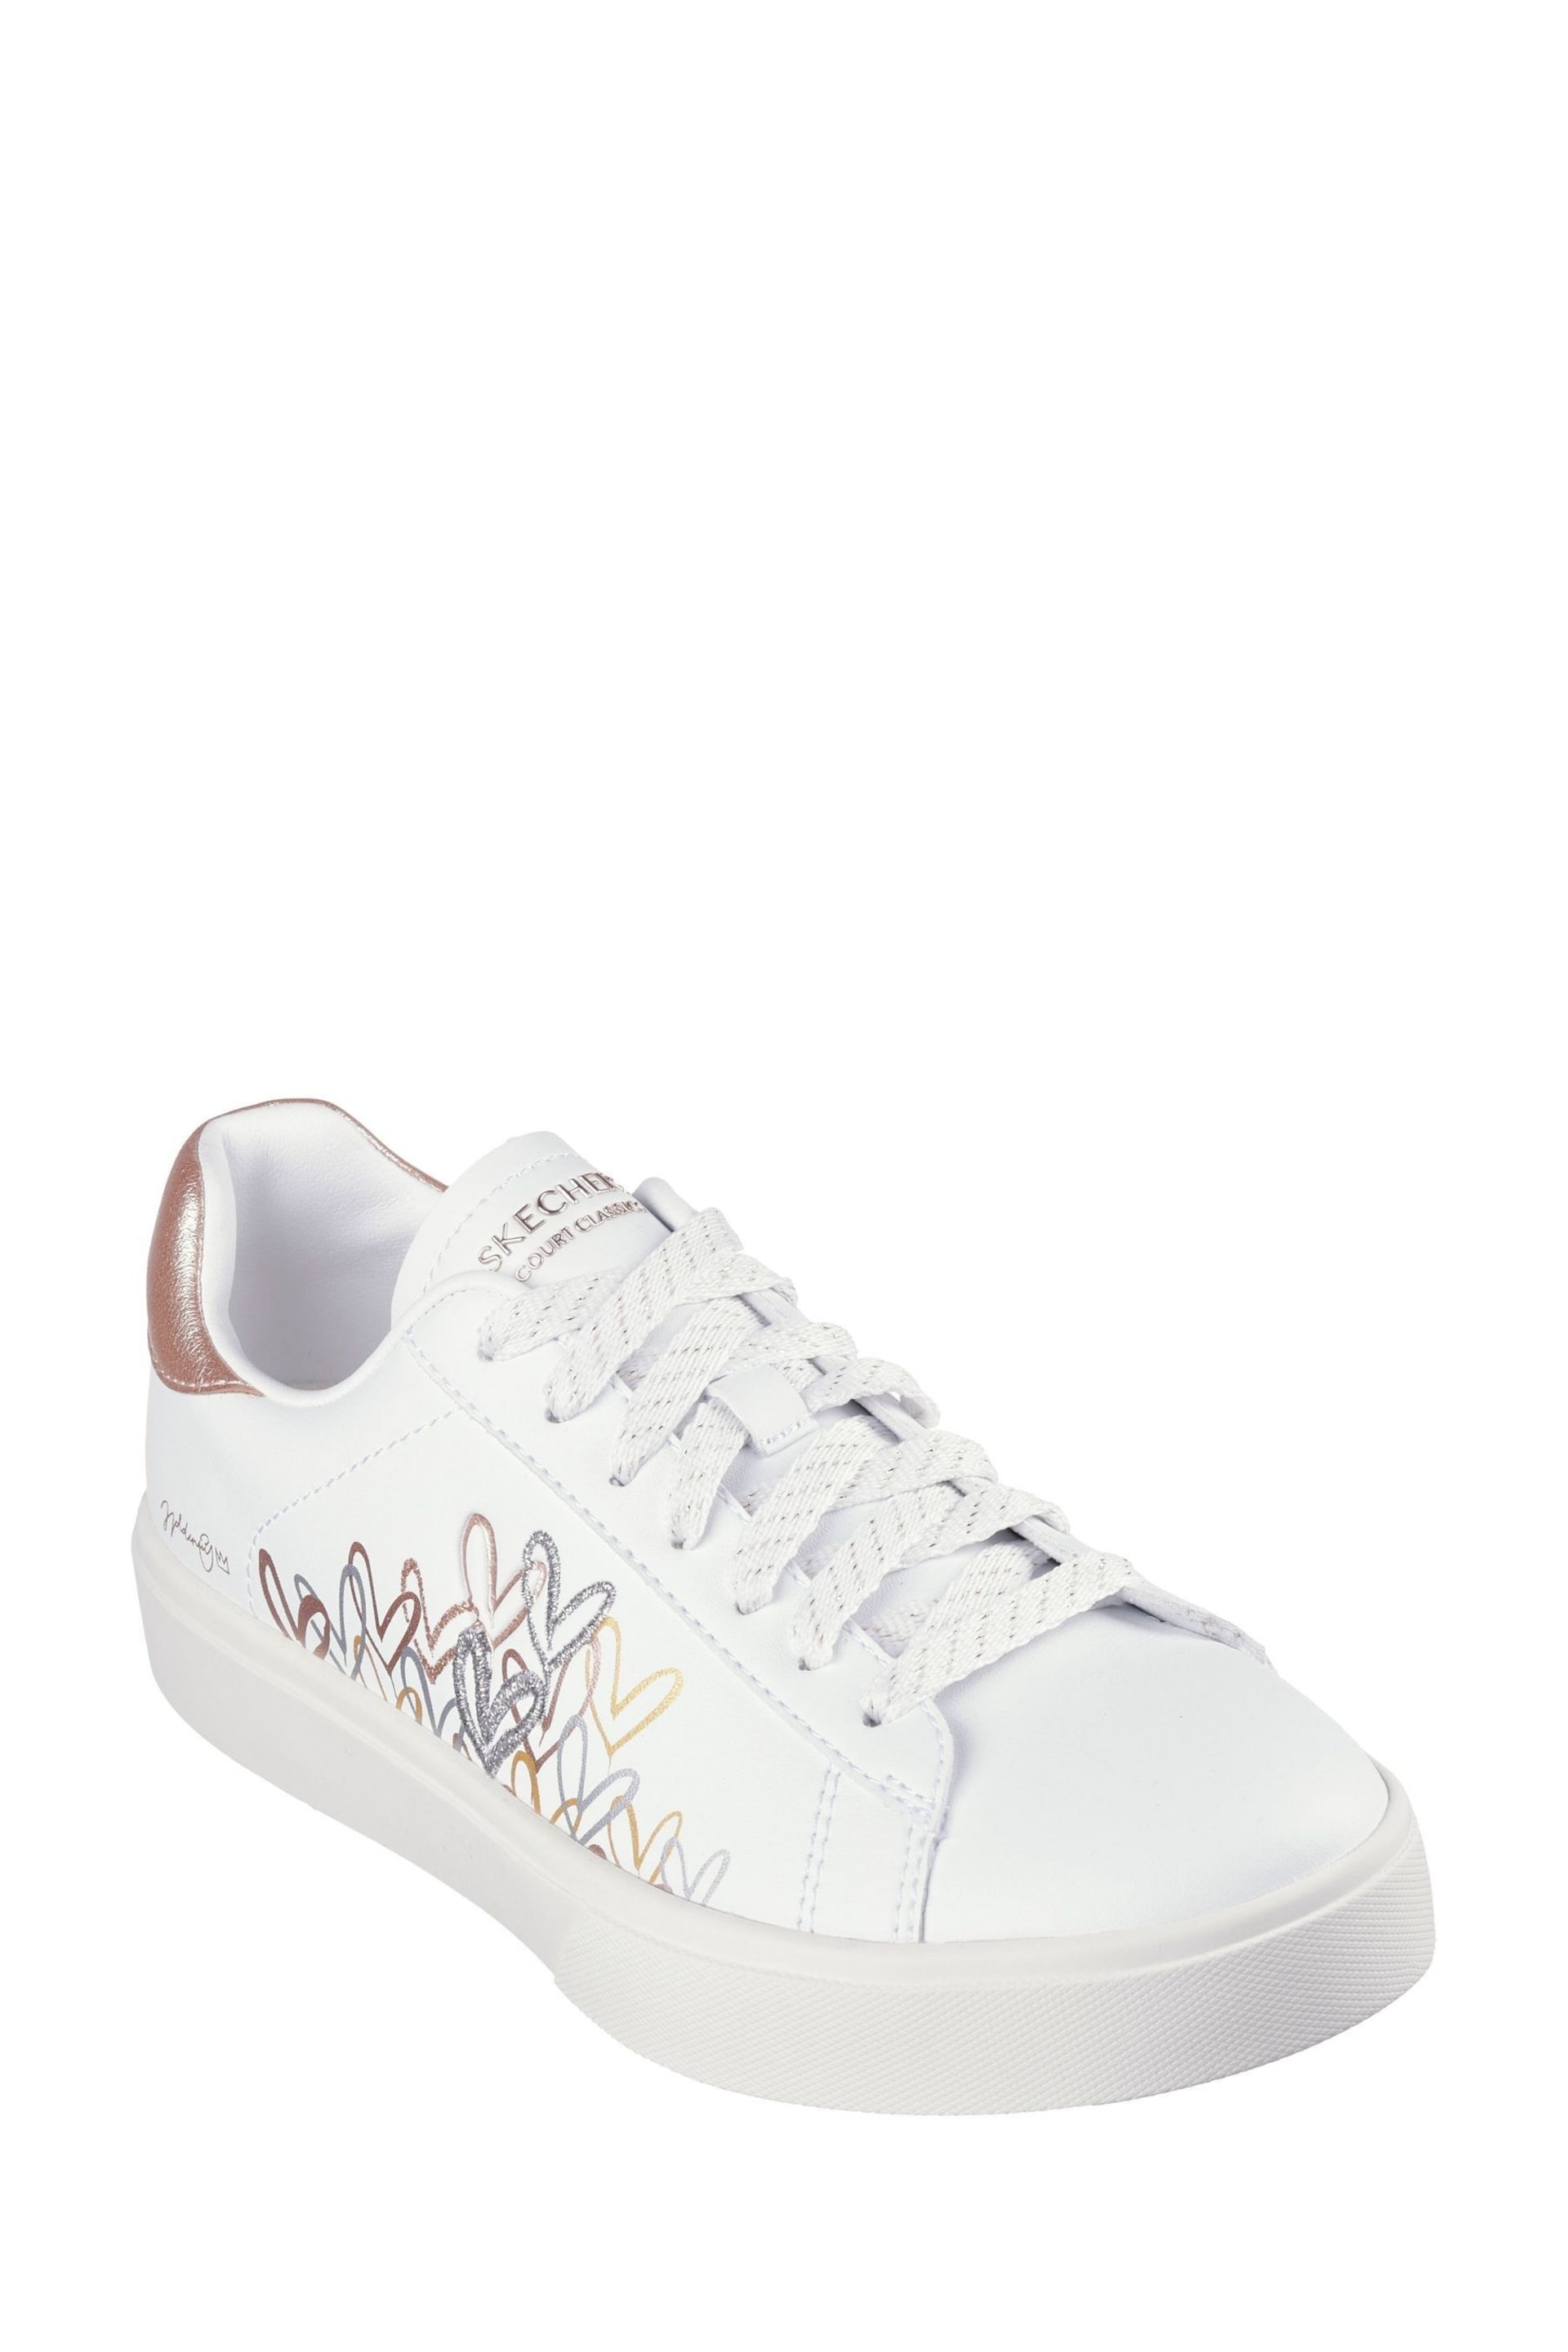 Skechers White Eden Lx Gleaming Hearts Trainers - Image 3 of 5